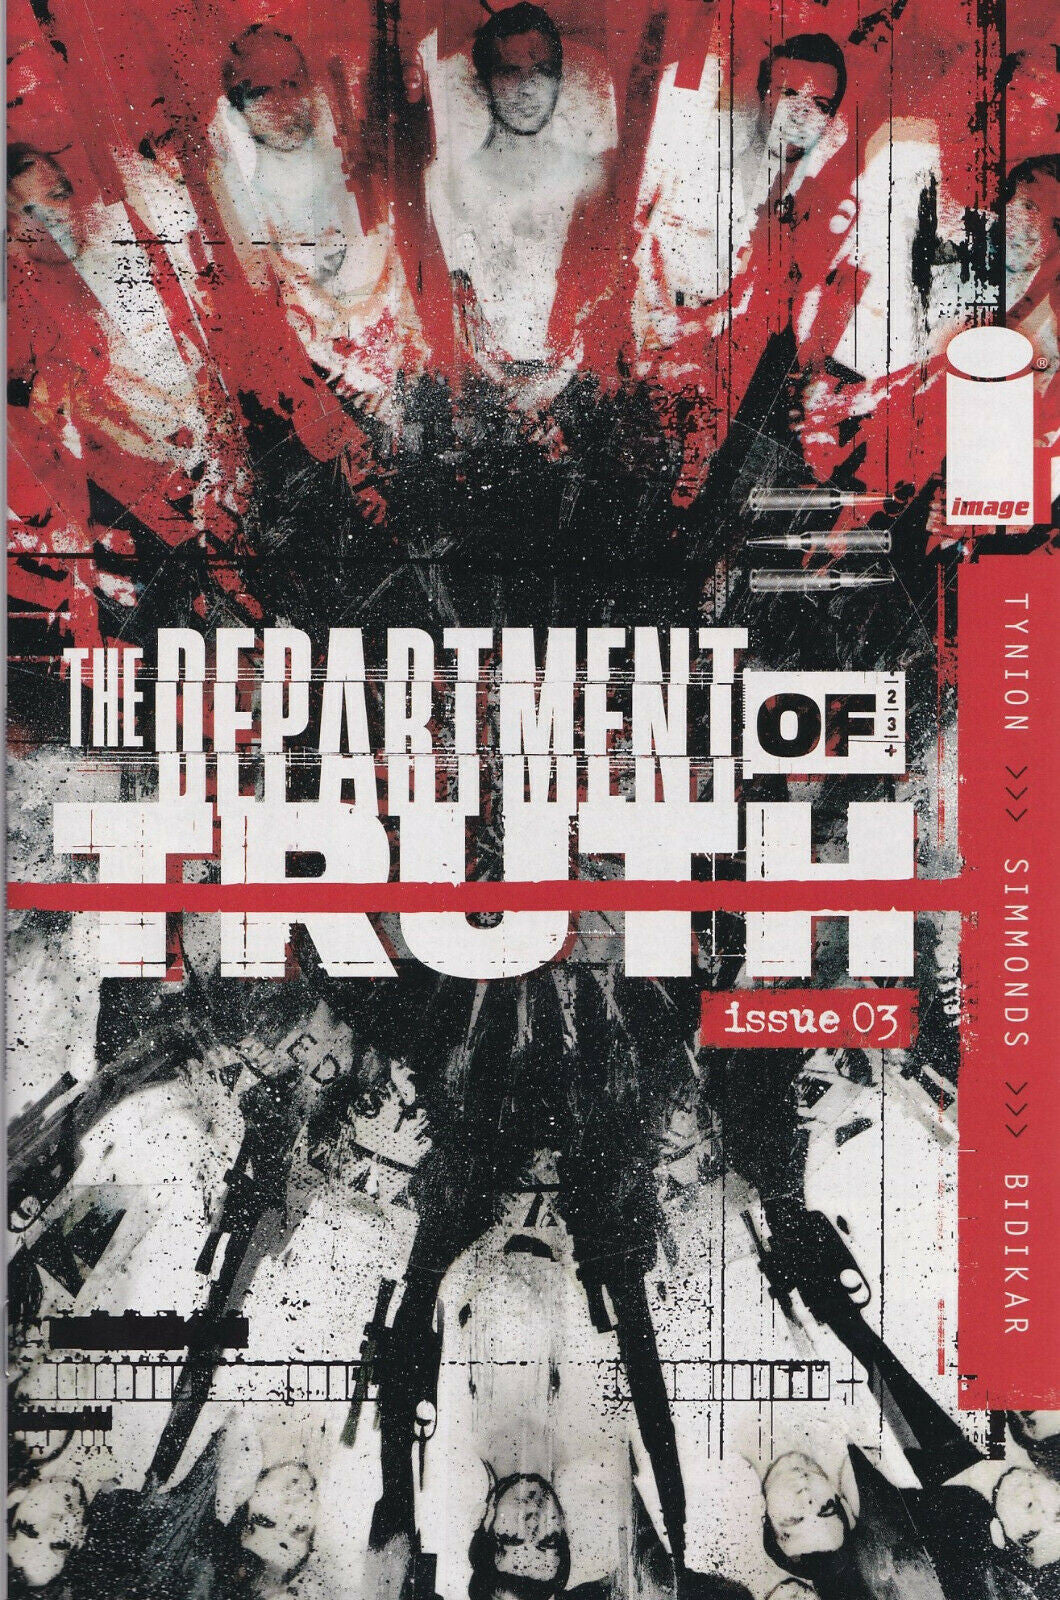 DEPARTMENT OF TRUTH #3 (SIMMONDS VARIANT)(1ST PRINT) COMIC BOOK ~ Image Comics